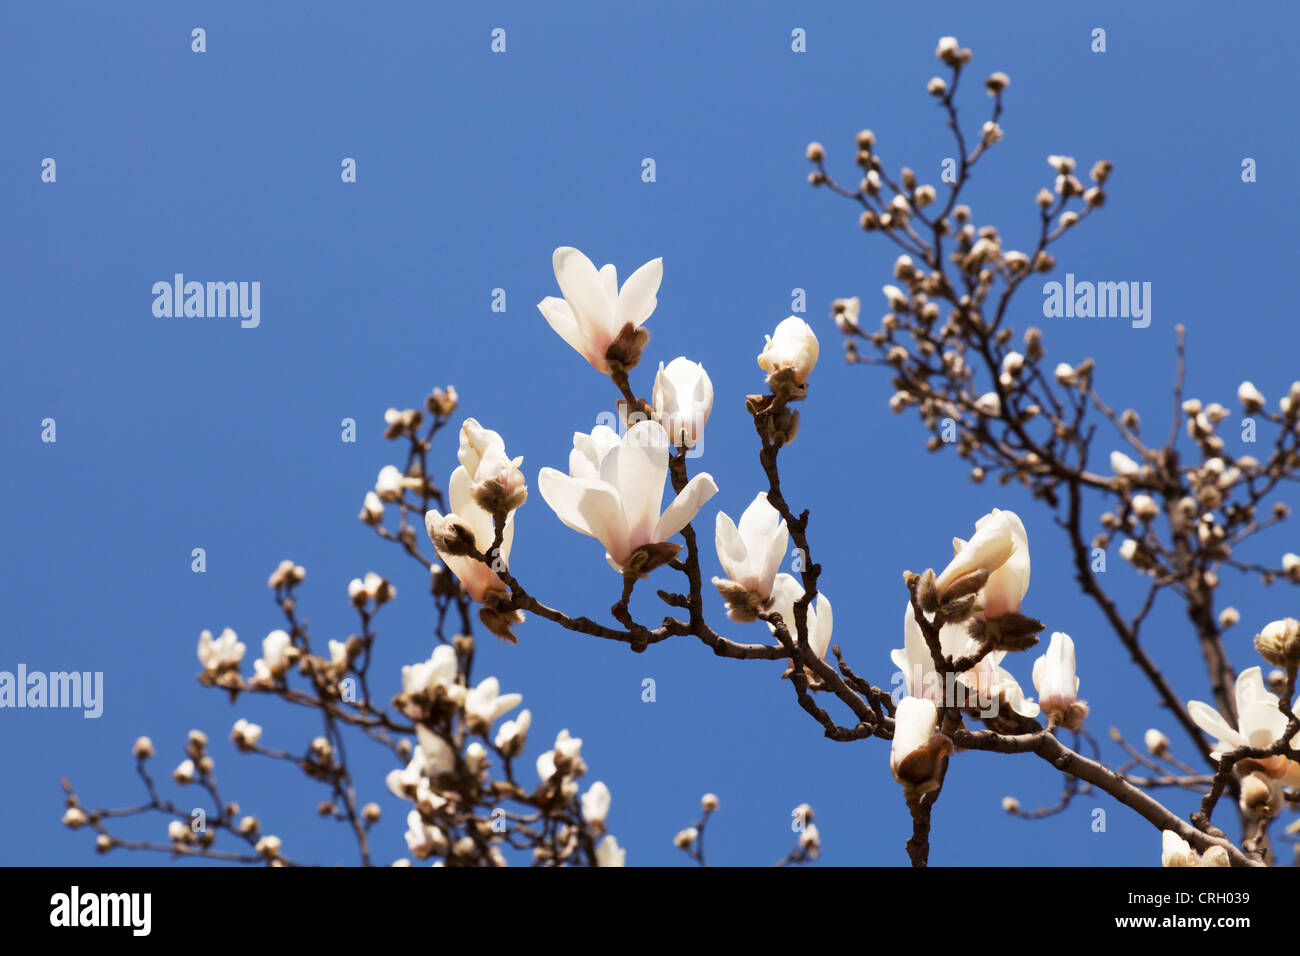 One of the first signs of spring in Beijing, China - magnolia bursting into bloom against a deep blue sky. Shallow DOF. Stock Photo